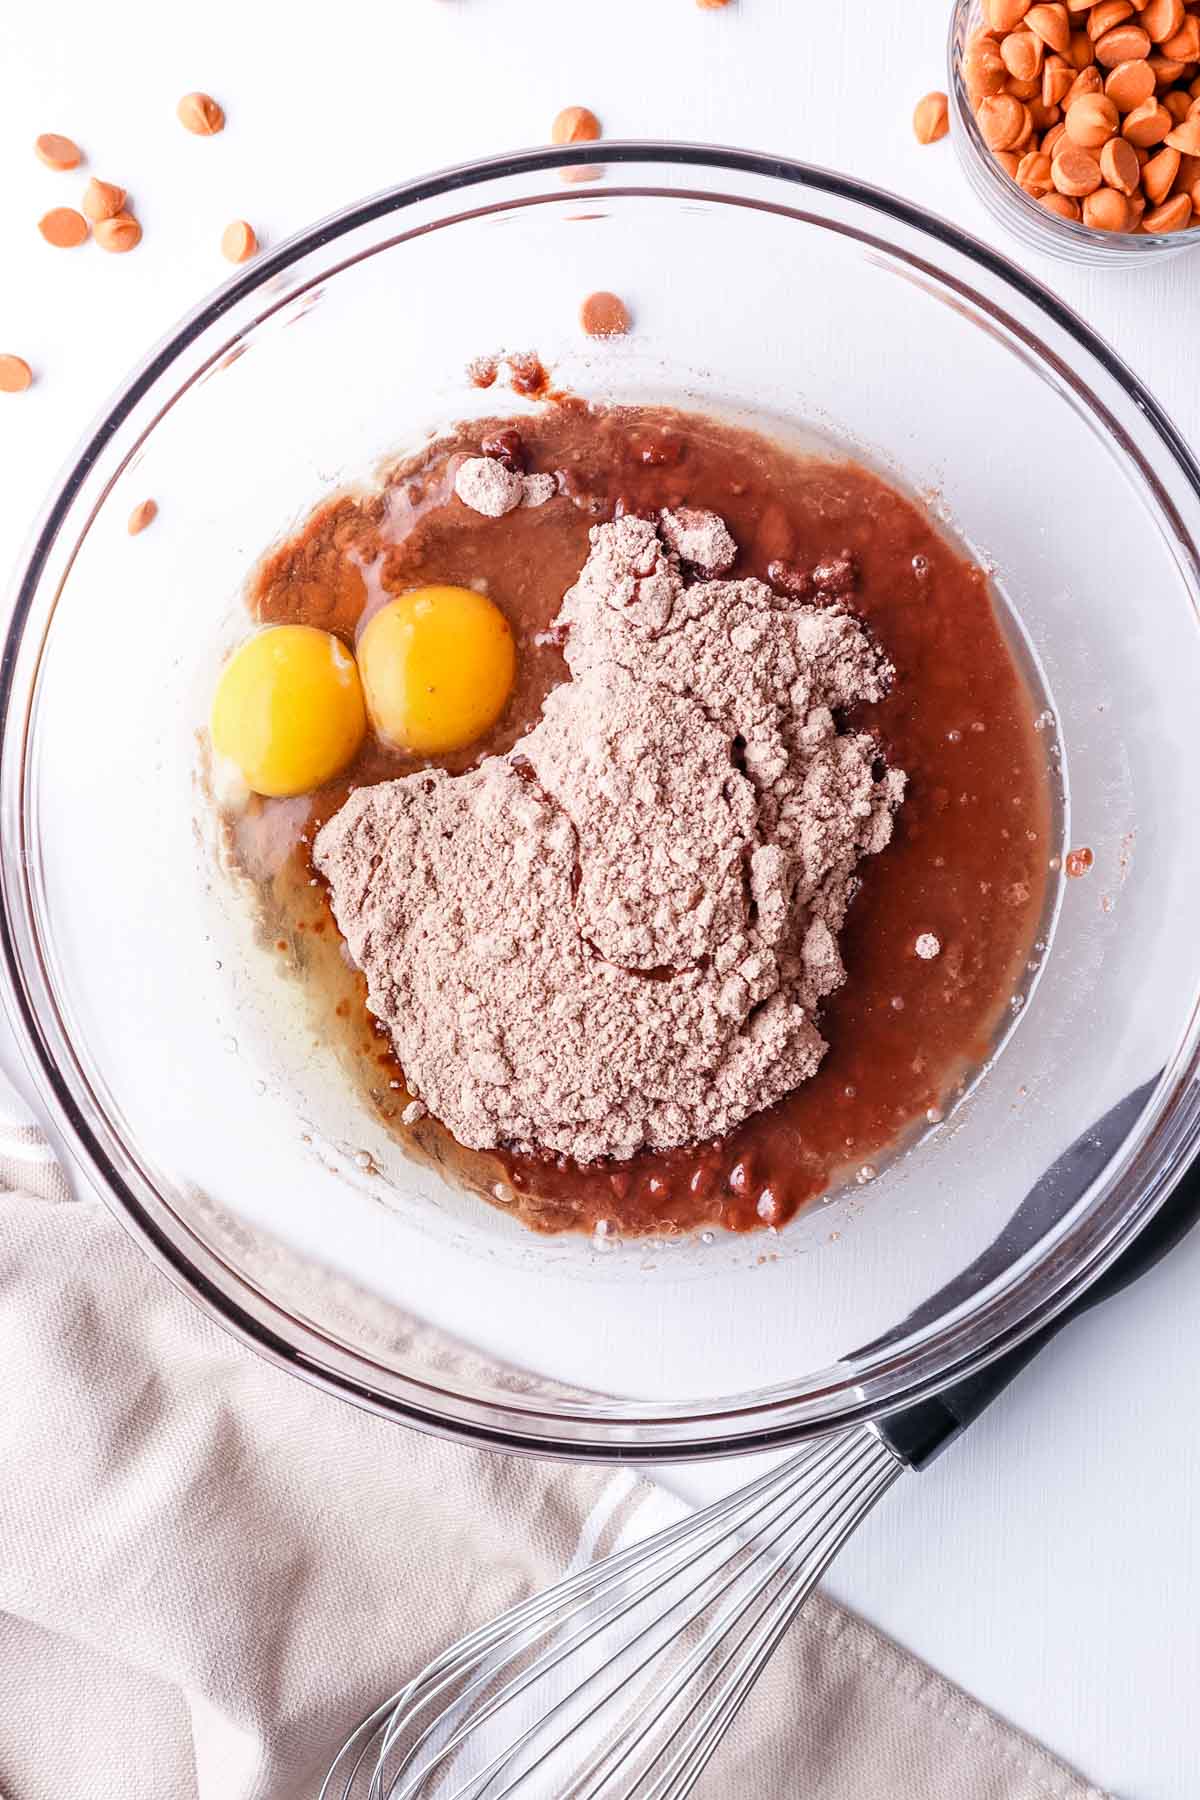 Cake mix, cocoa powder, oil and 2 eggs in a glass bowl.